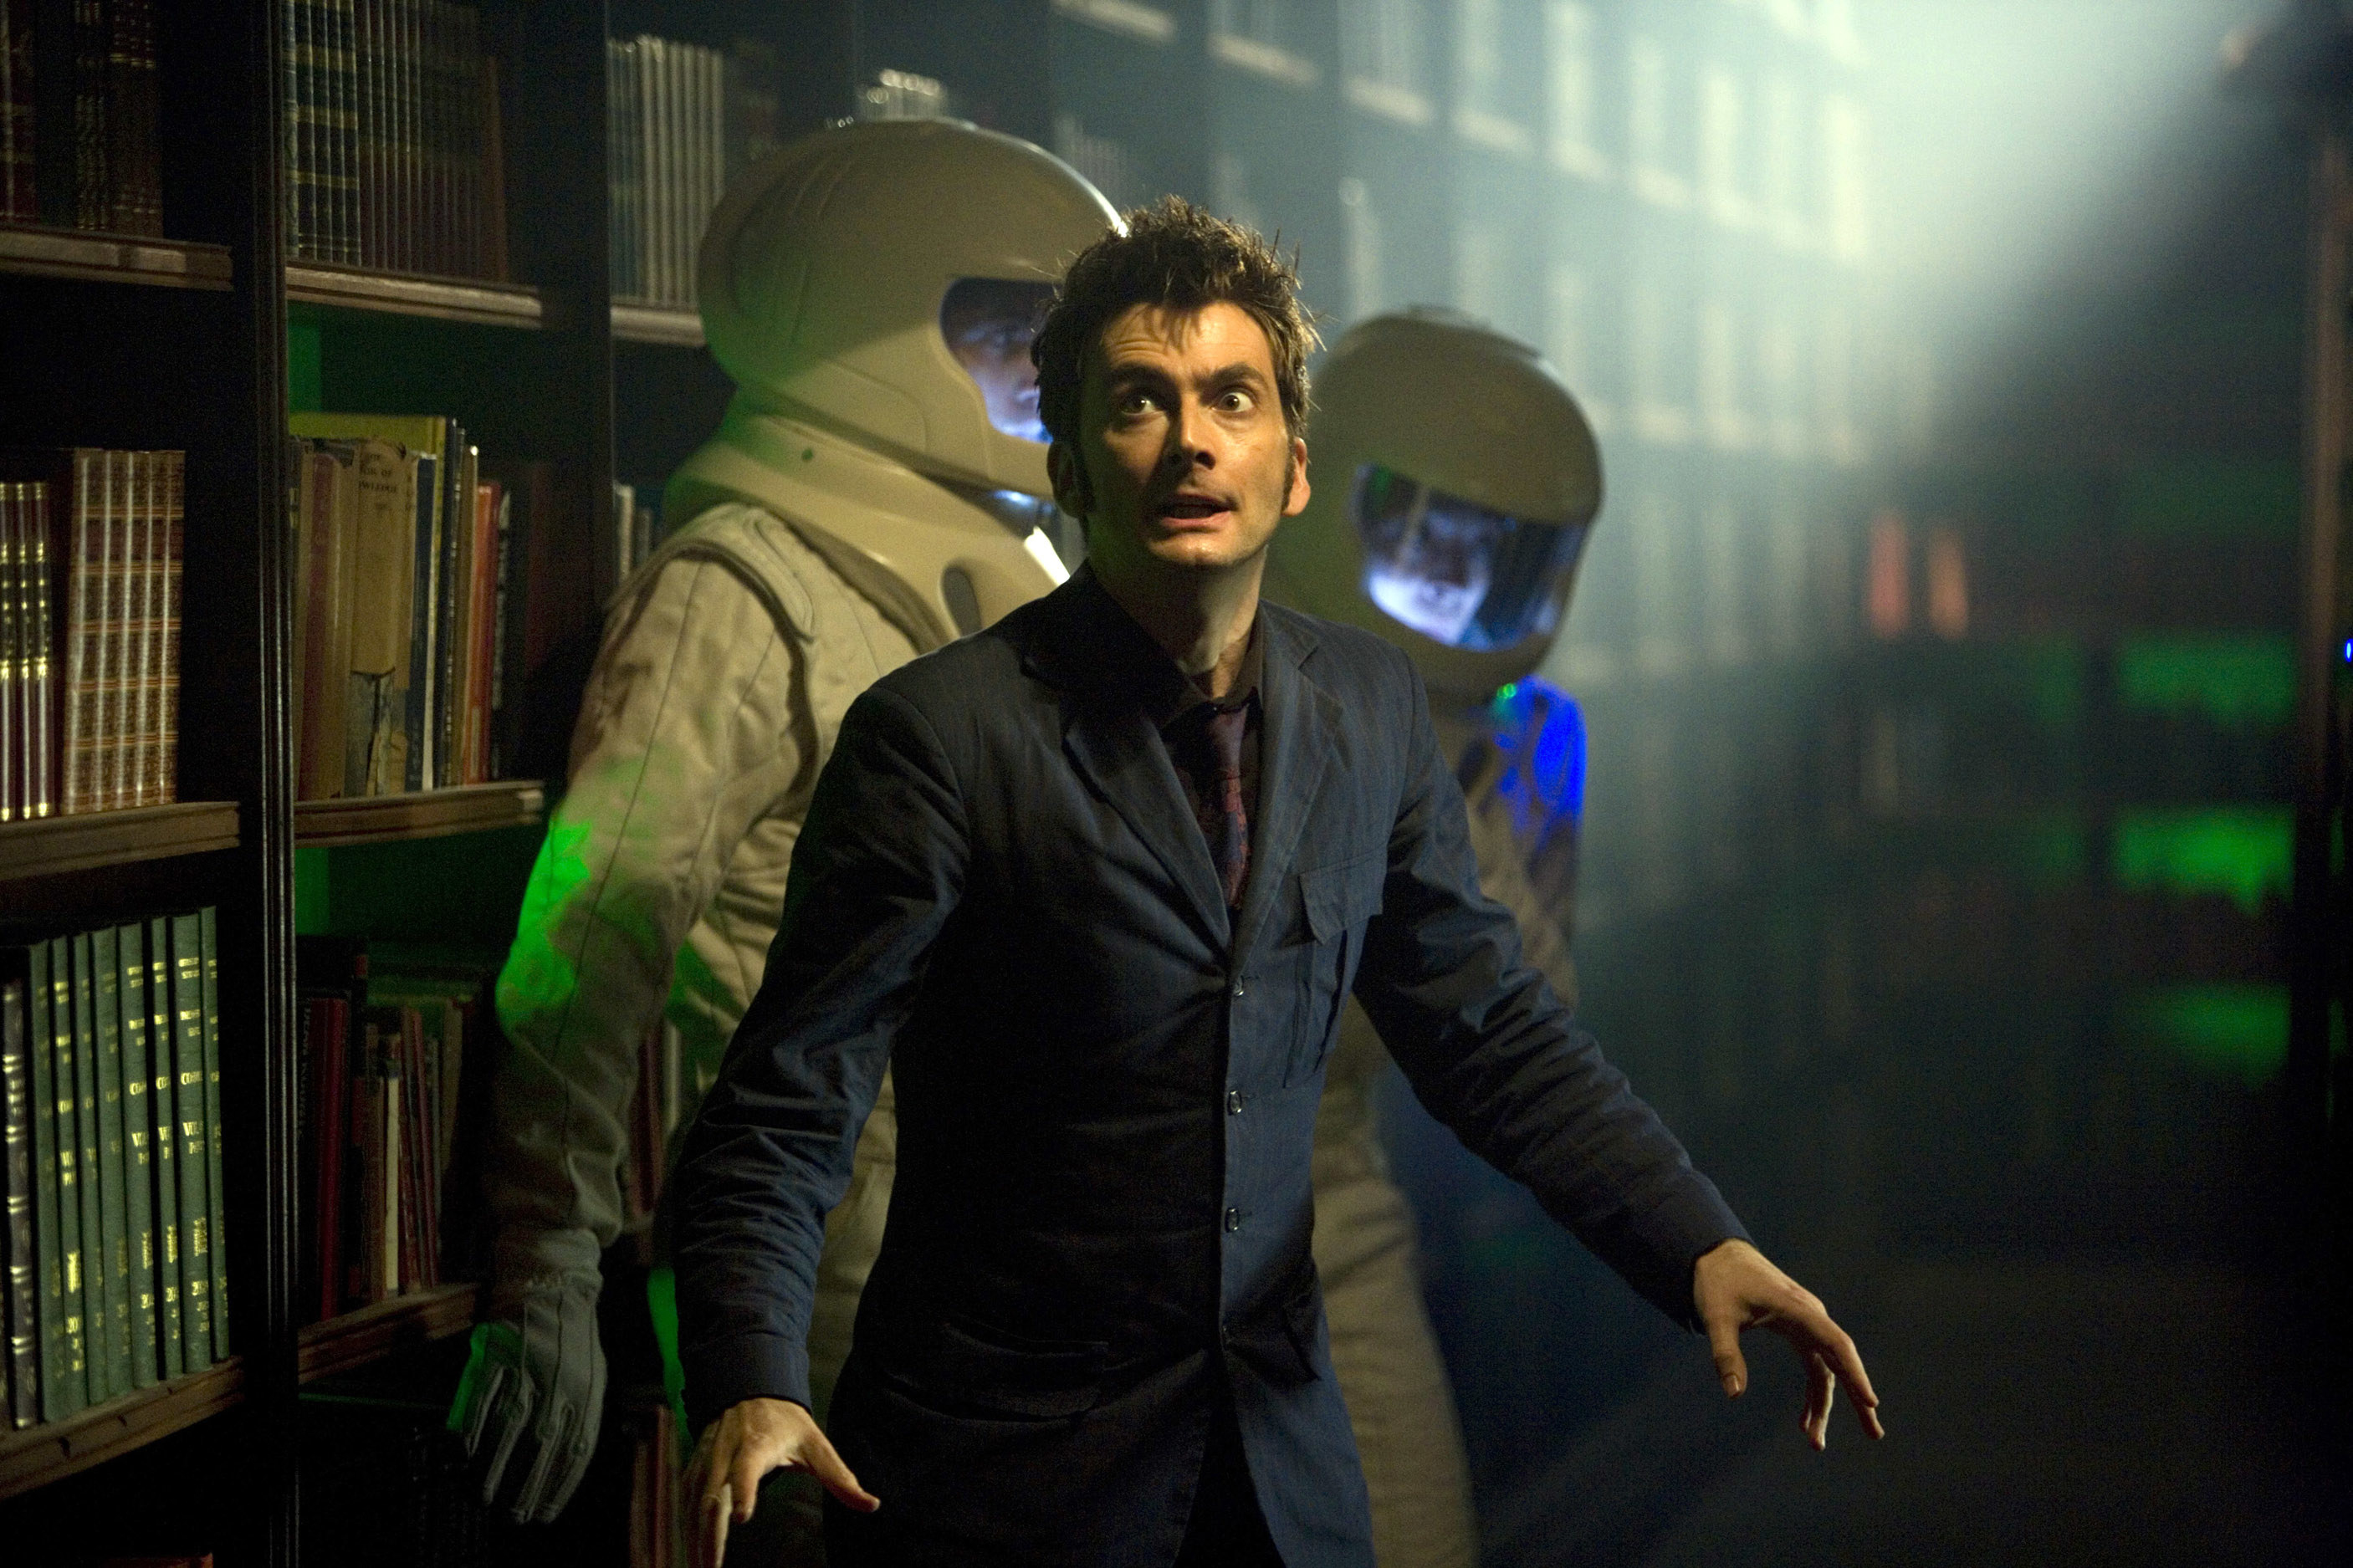 The doctor in a suit looking panicked